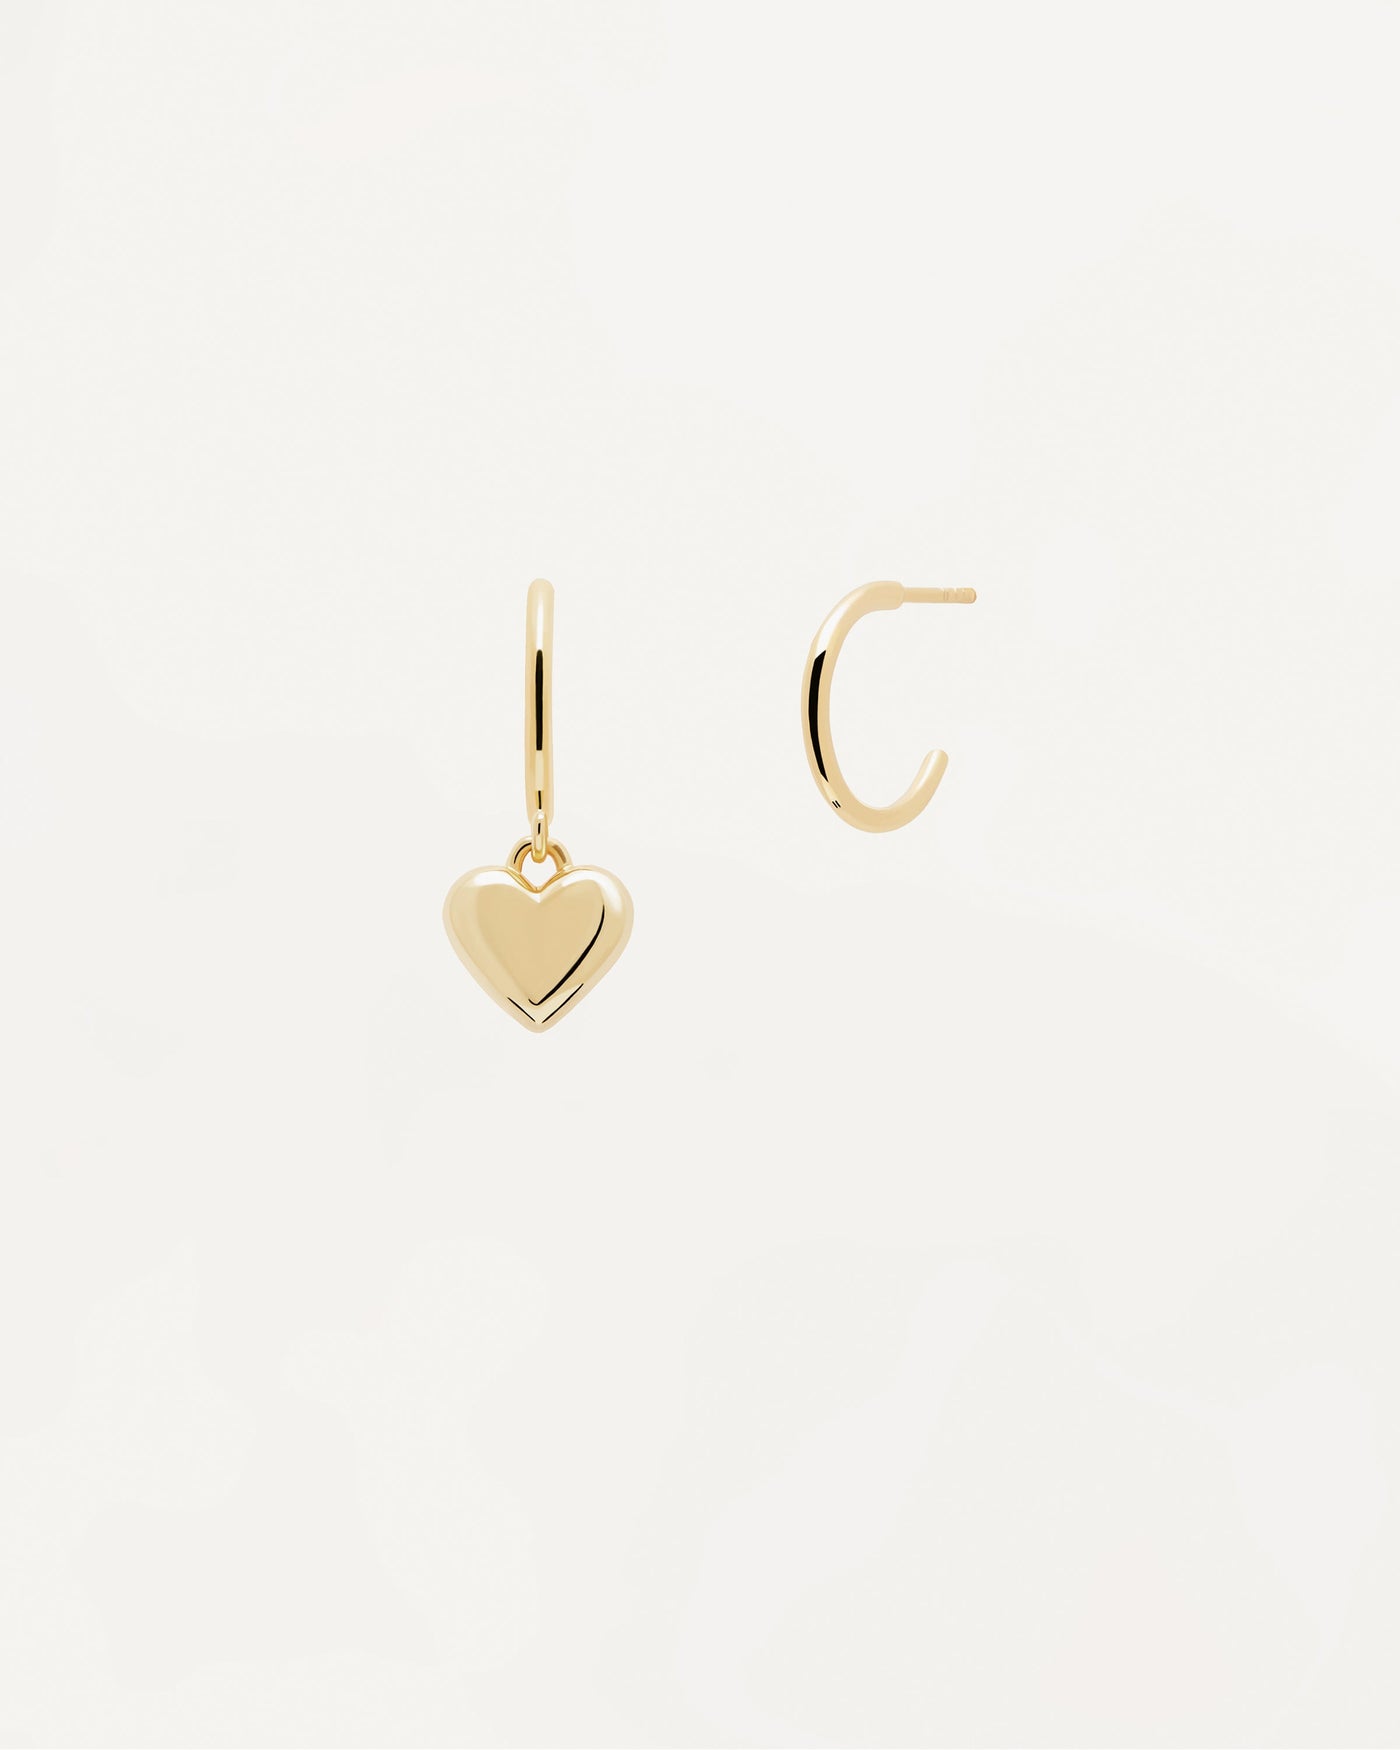 2023 Selection | L'Absolu Gold Earrings. Get the latest arrival from PDPAOLA. Place your order safely and get this Best Seller. Free Shipping over 40€